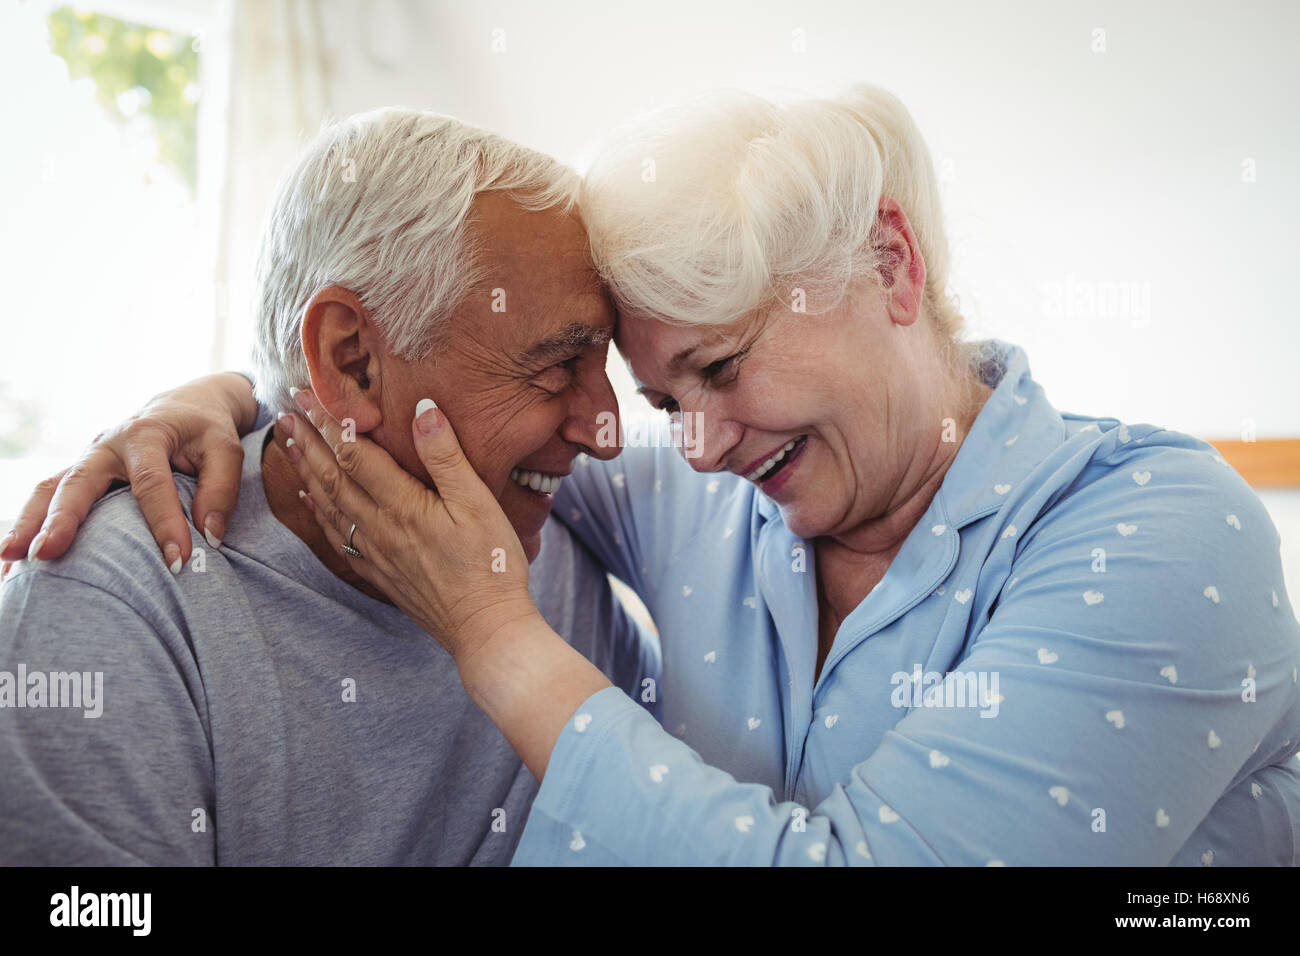 Senior couple embracing each other Stock Photo